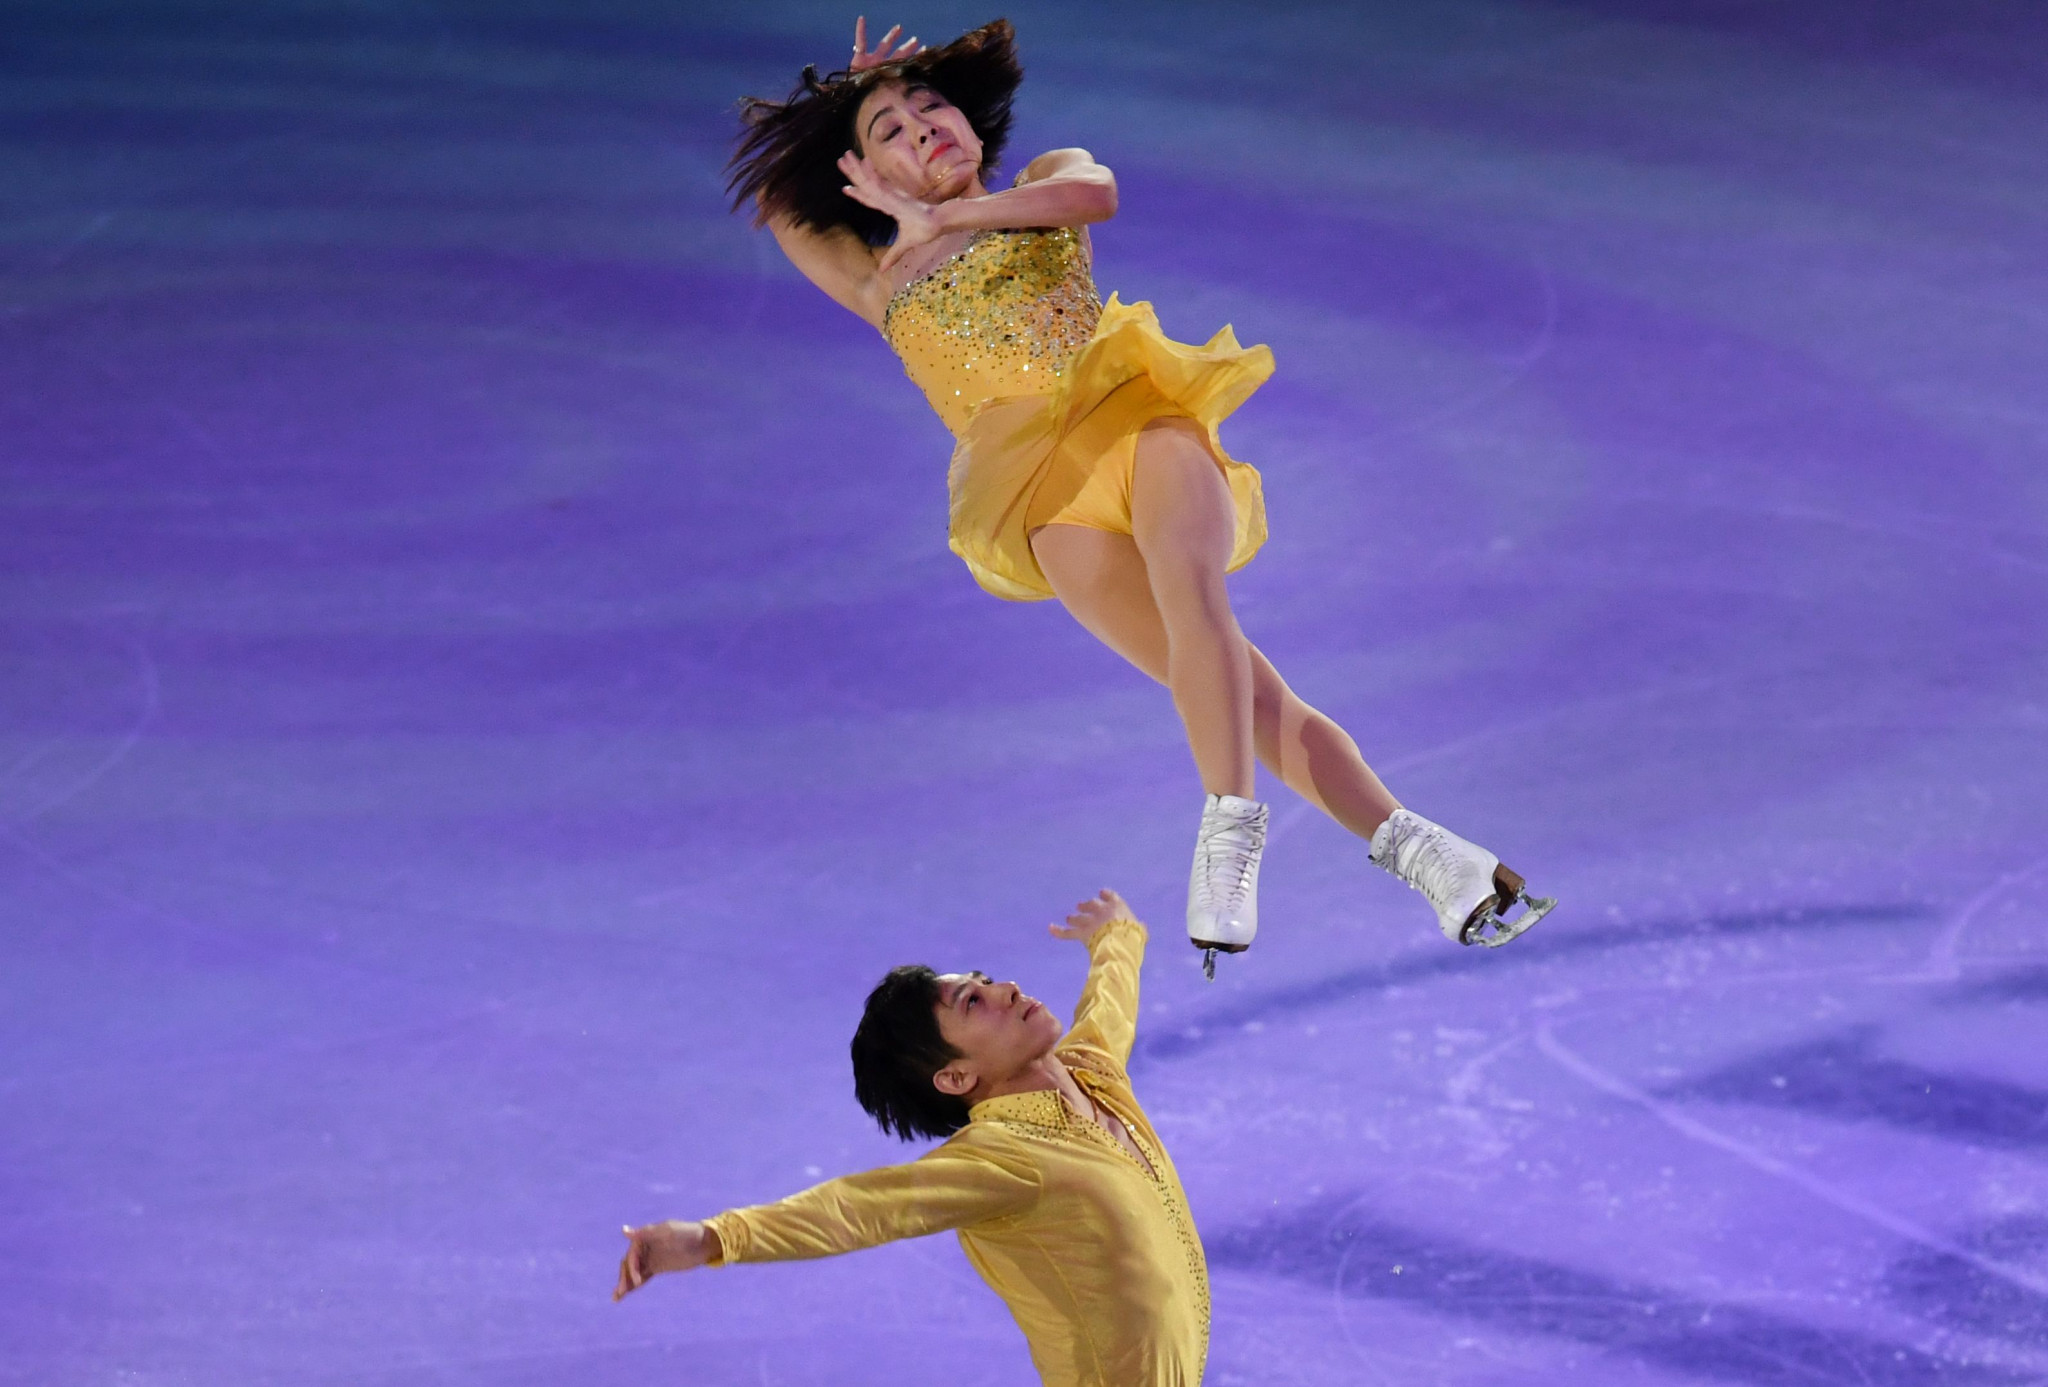 Reigning world pairs champions Wenjing Sui and Cong Han will make their first Grand Prix appearance of the season in Beijing ©Getty Images